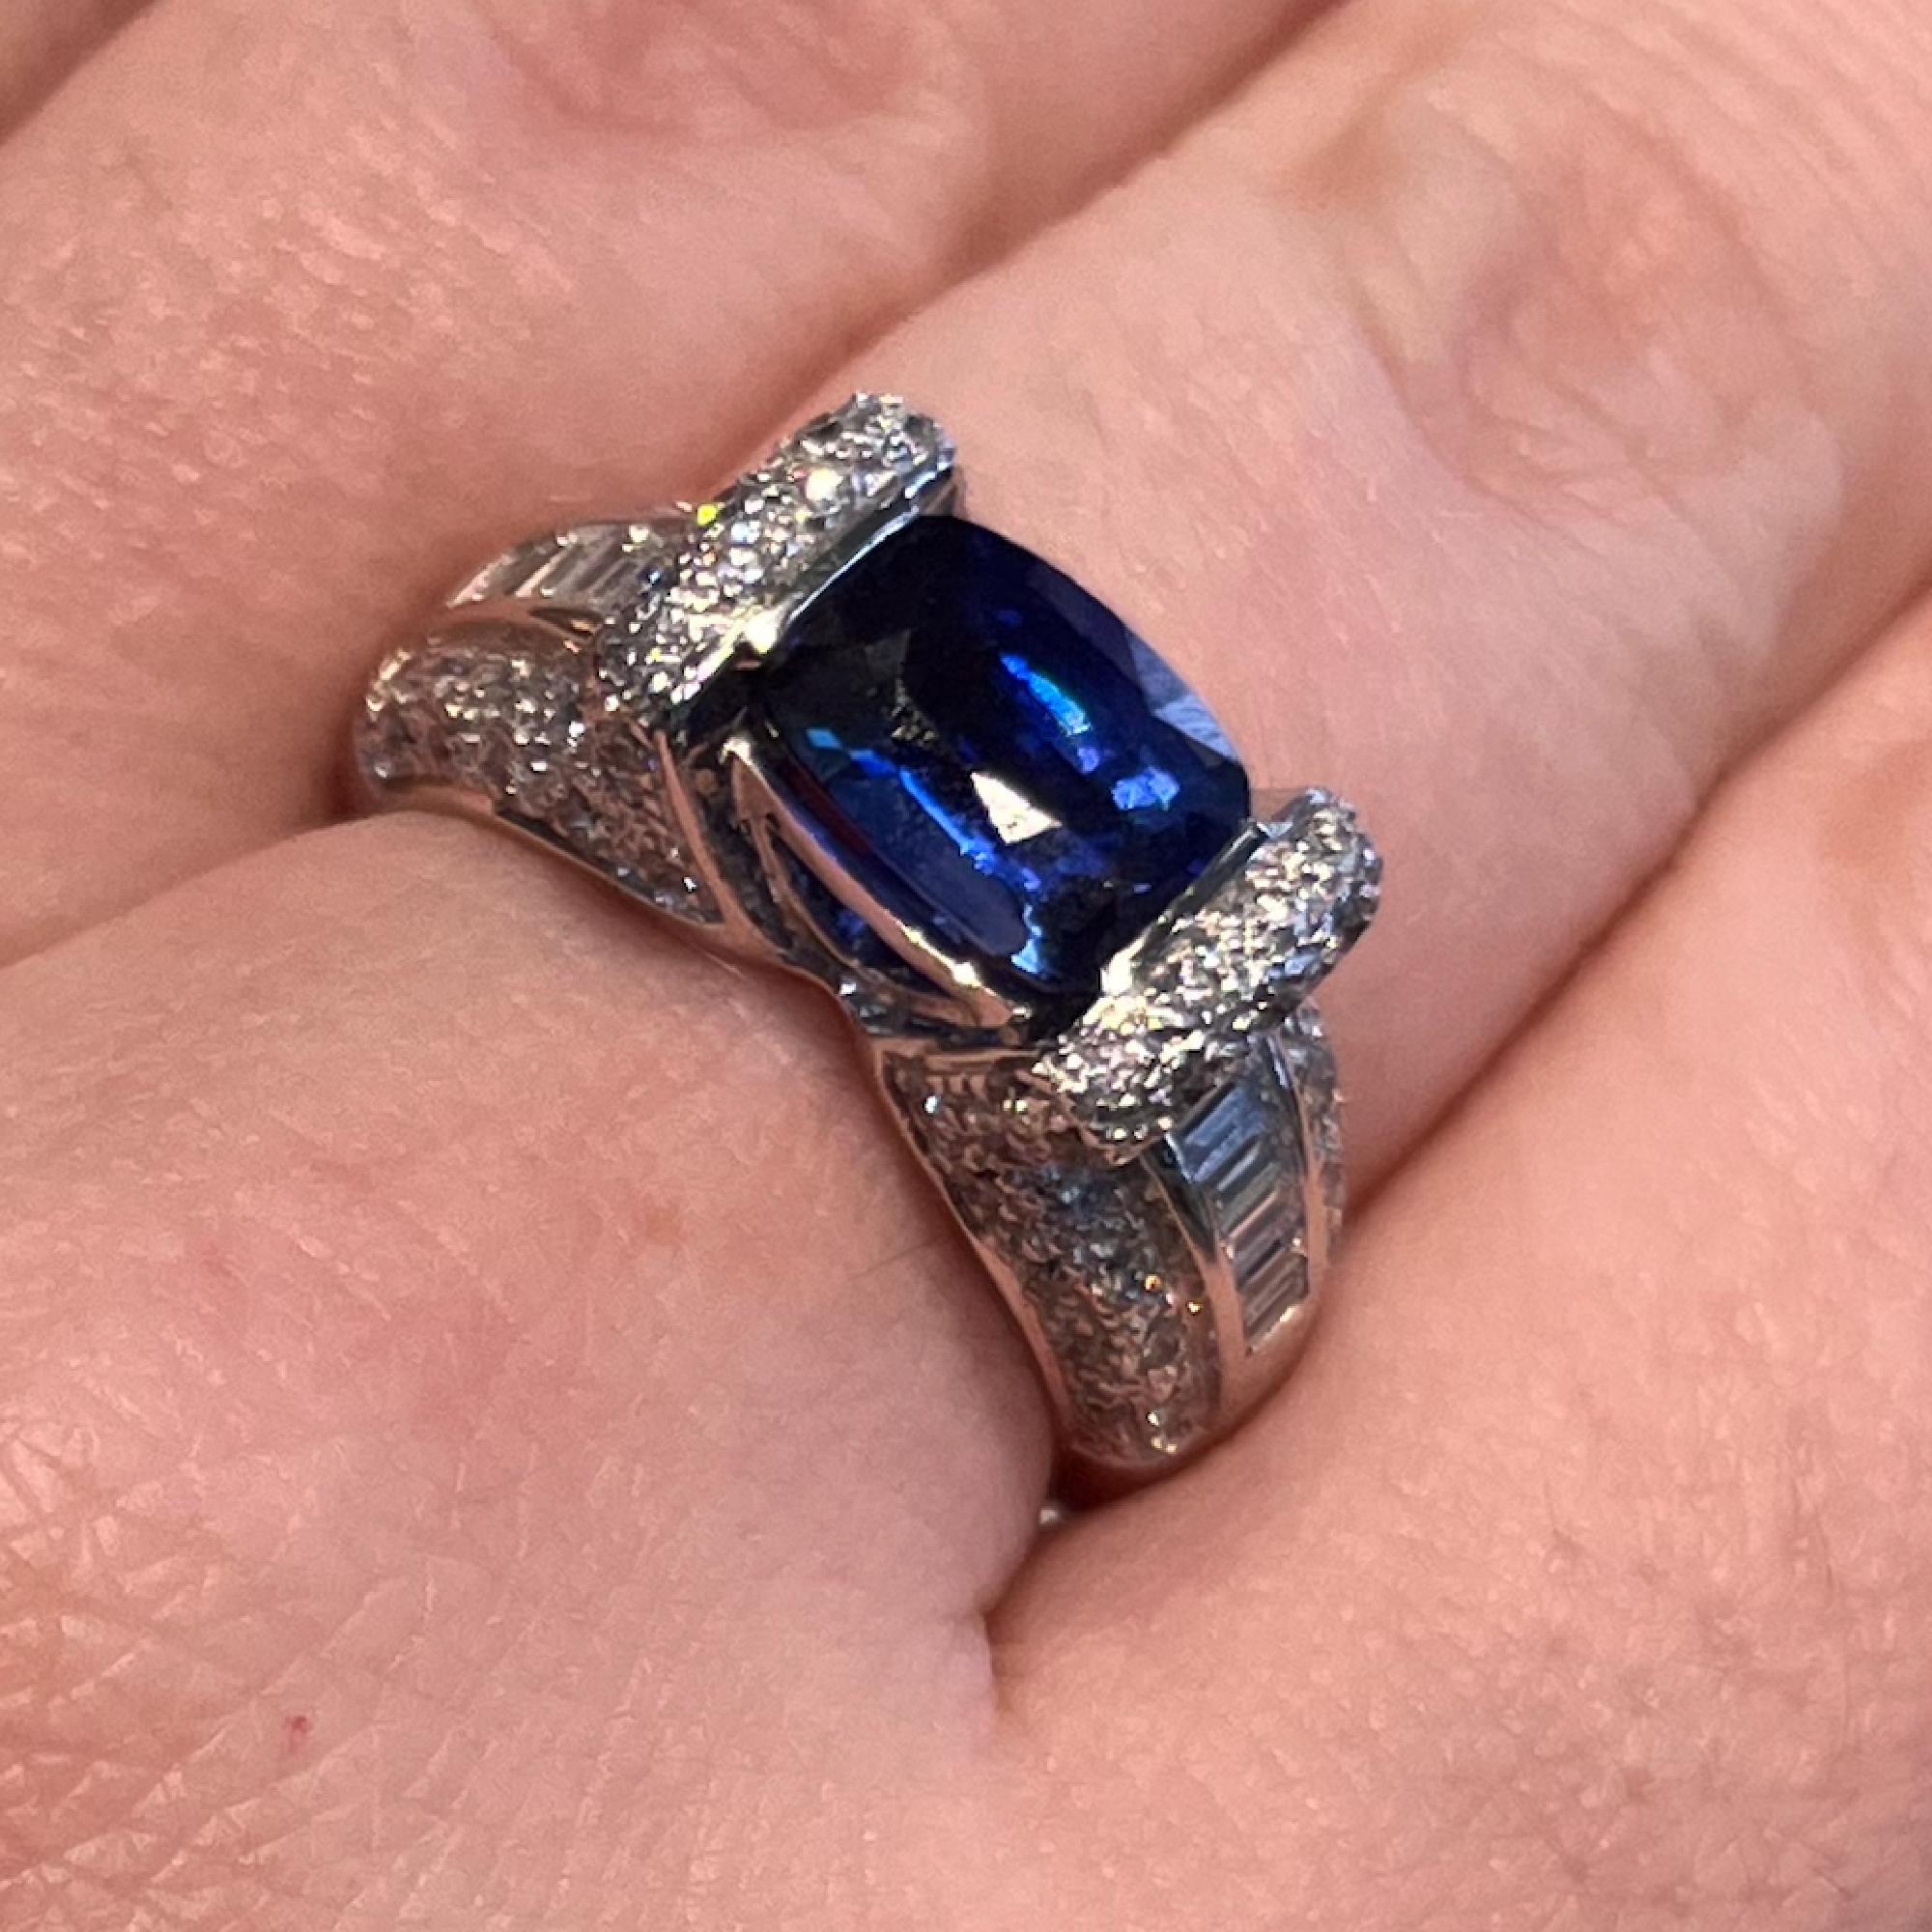 18kt White Gold No Heat Sapphire 2.86cts & Diamond Ring. This Ring Contains One (1) Elongated Cushion Cut Sapphire Weighing Approximately 2.86cts, This Stone Measures 9.3mm x 6.9mm x 4.8mm. The Sapphire is Not Heated or Color Treated. The Sapphire